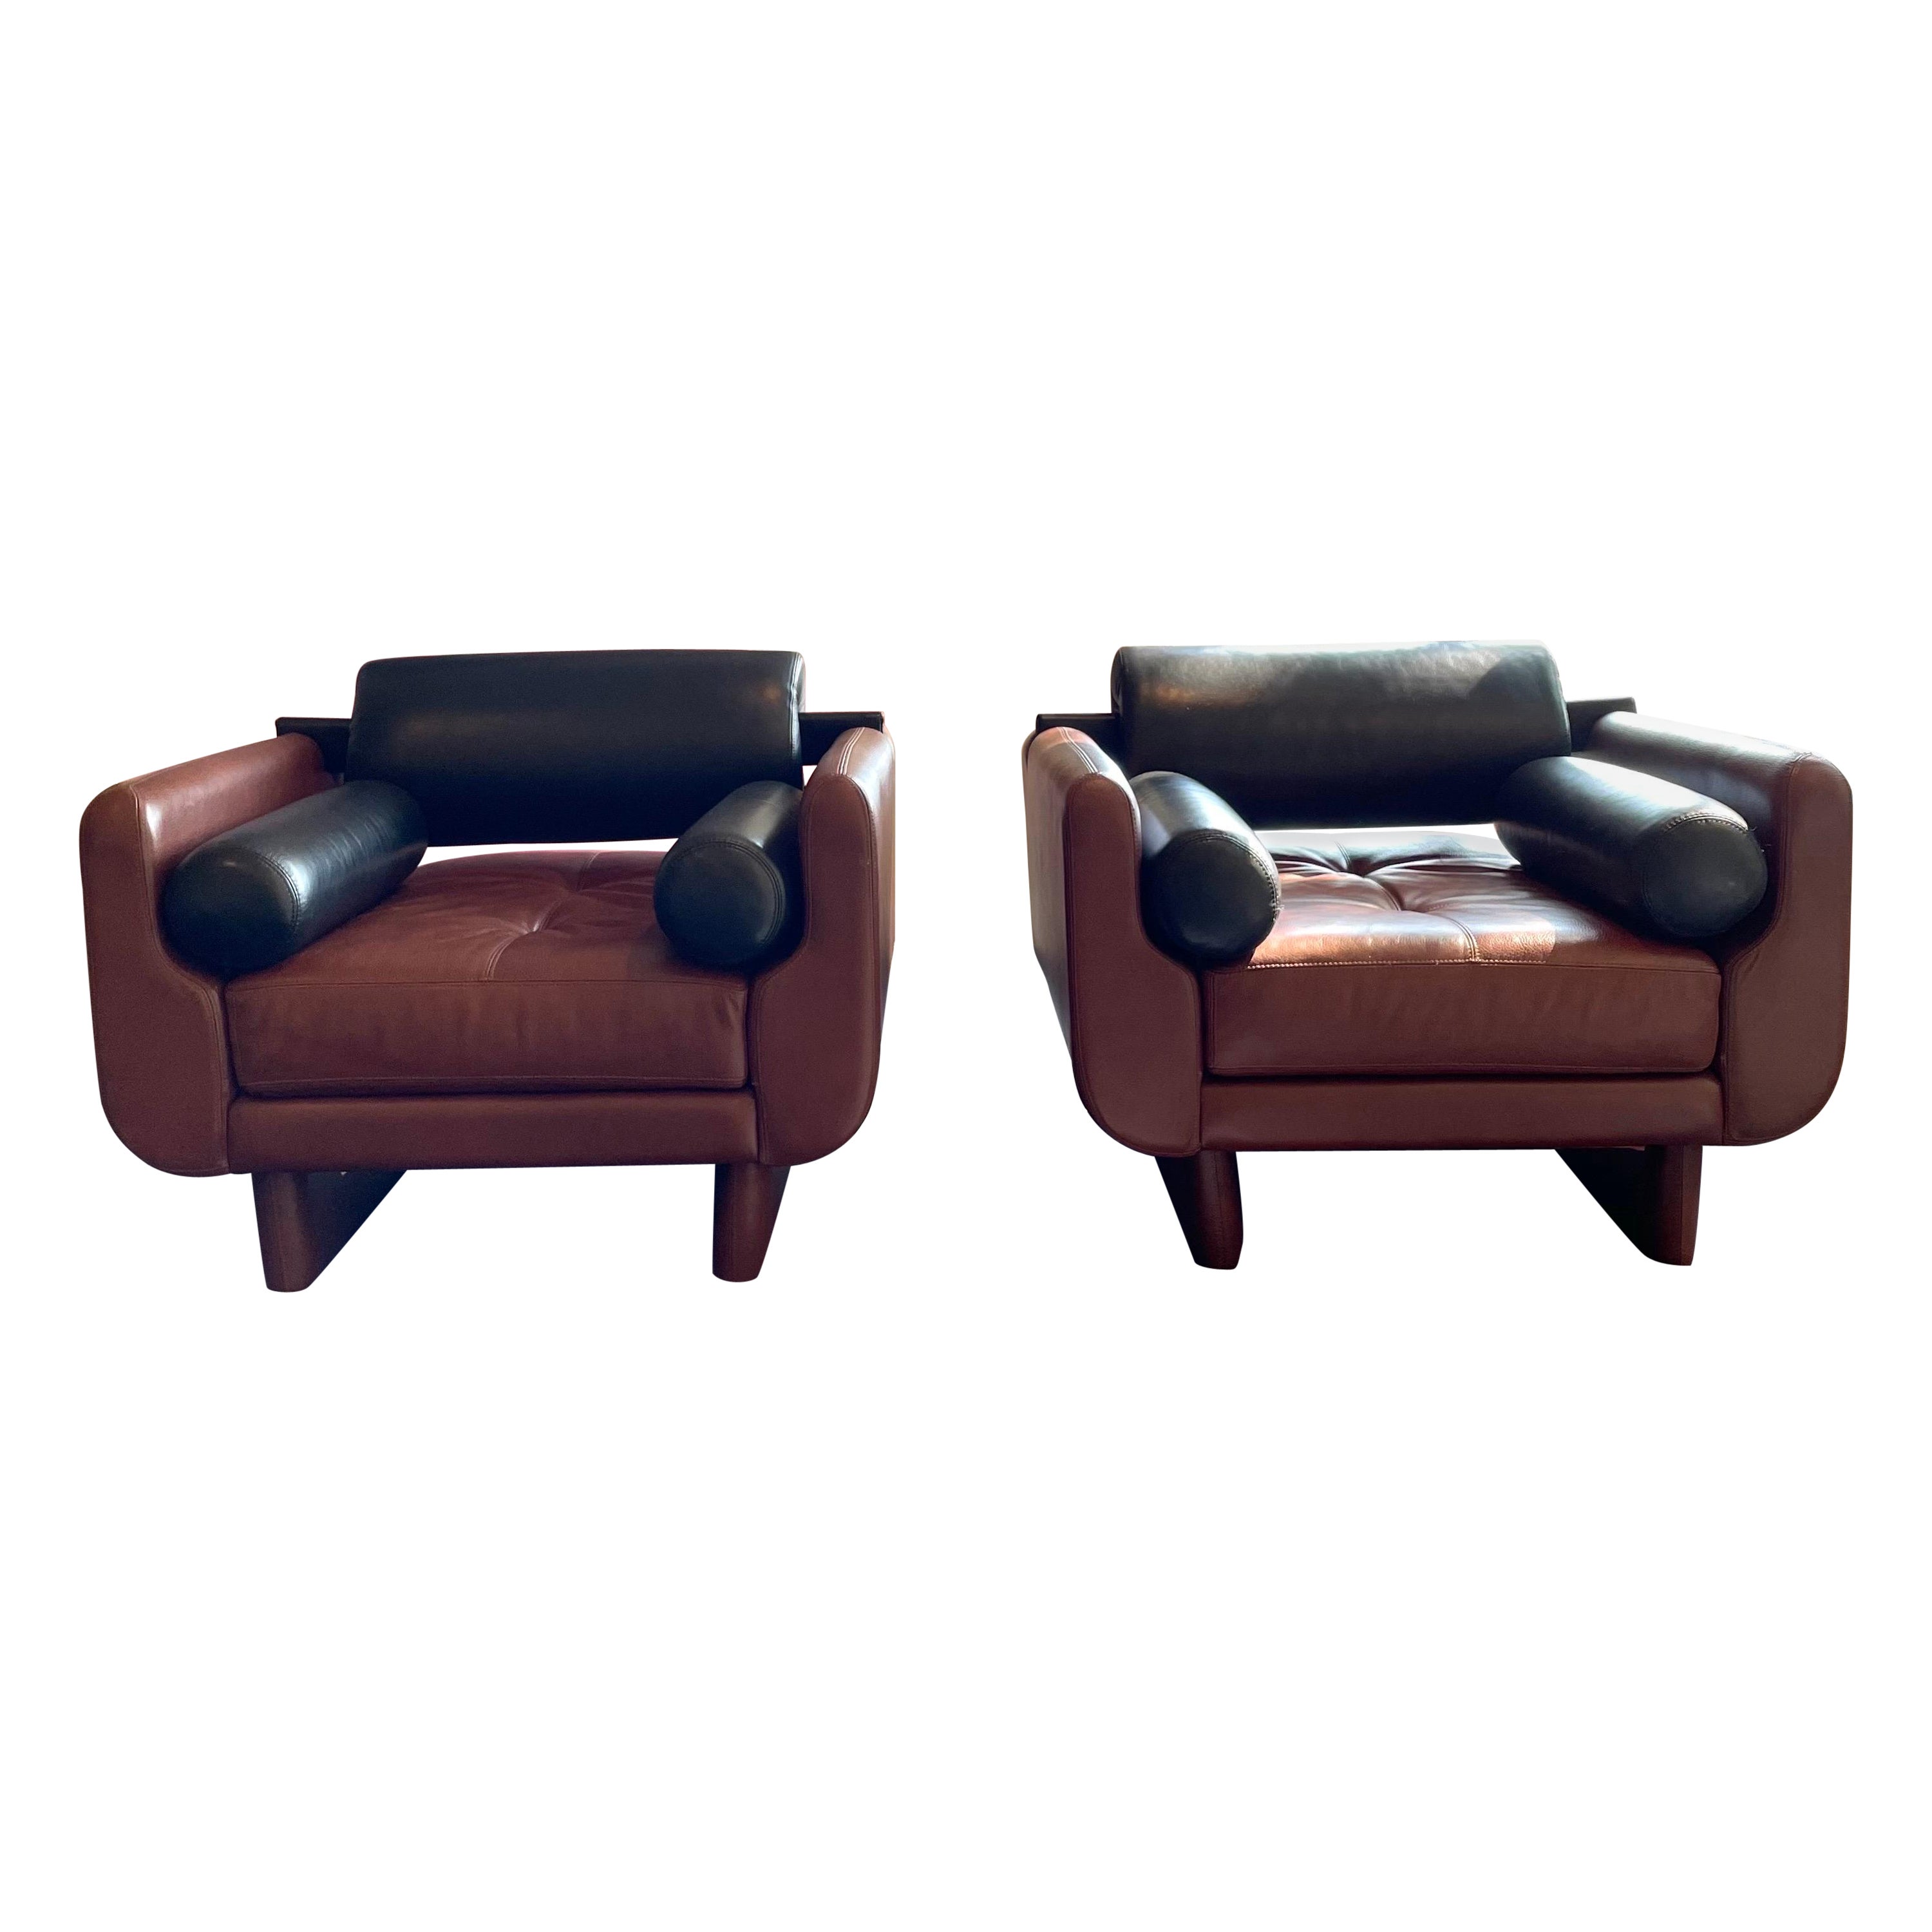 Vladimir Kagan "Matinee" Chairs for American Leather- a pair